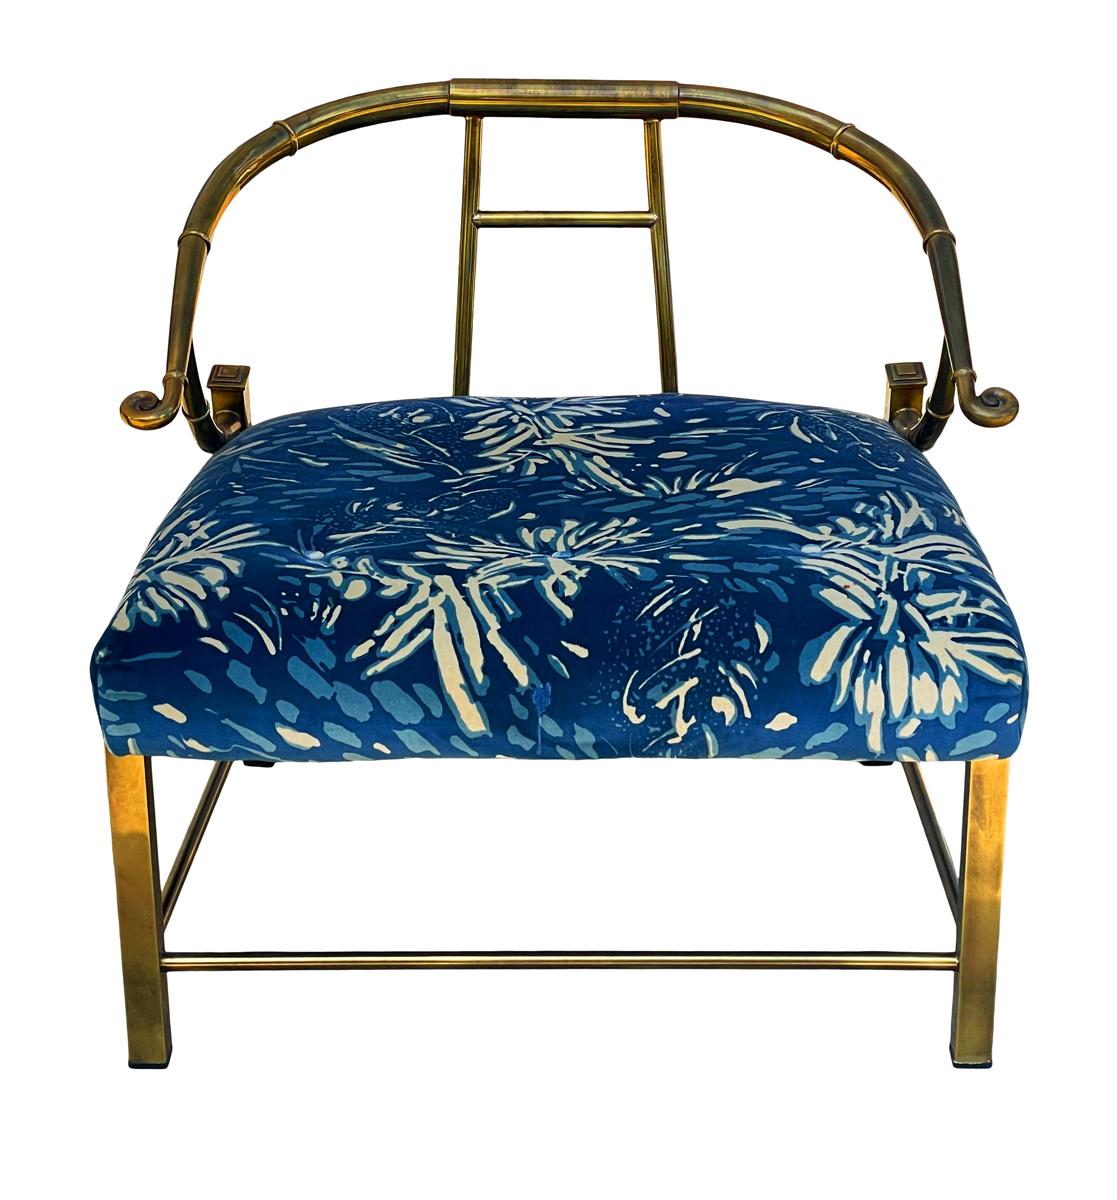 A Classic well built asian inspired lounge chair produced by Mastercraft in the early 1970s. It features a heavy brass framing with the original decorator fabric. Ready for use.